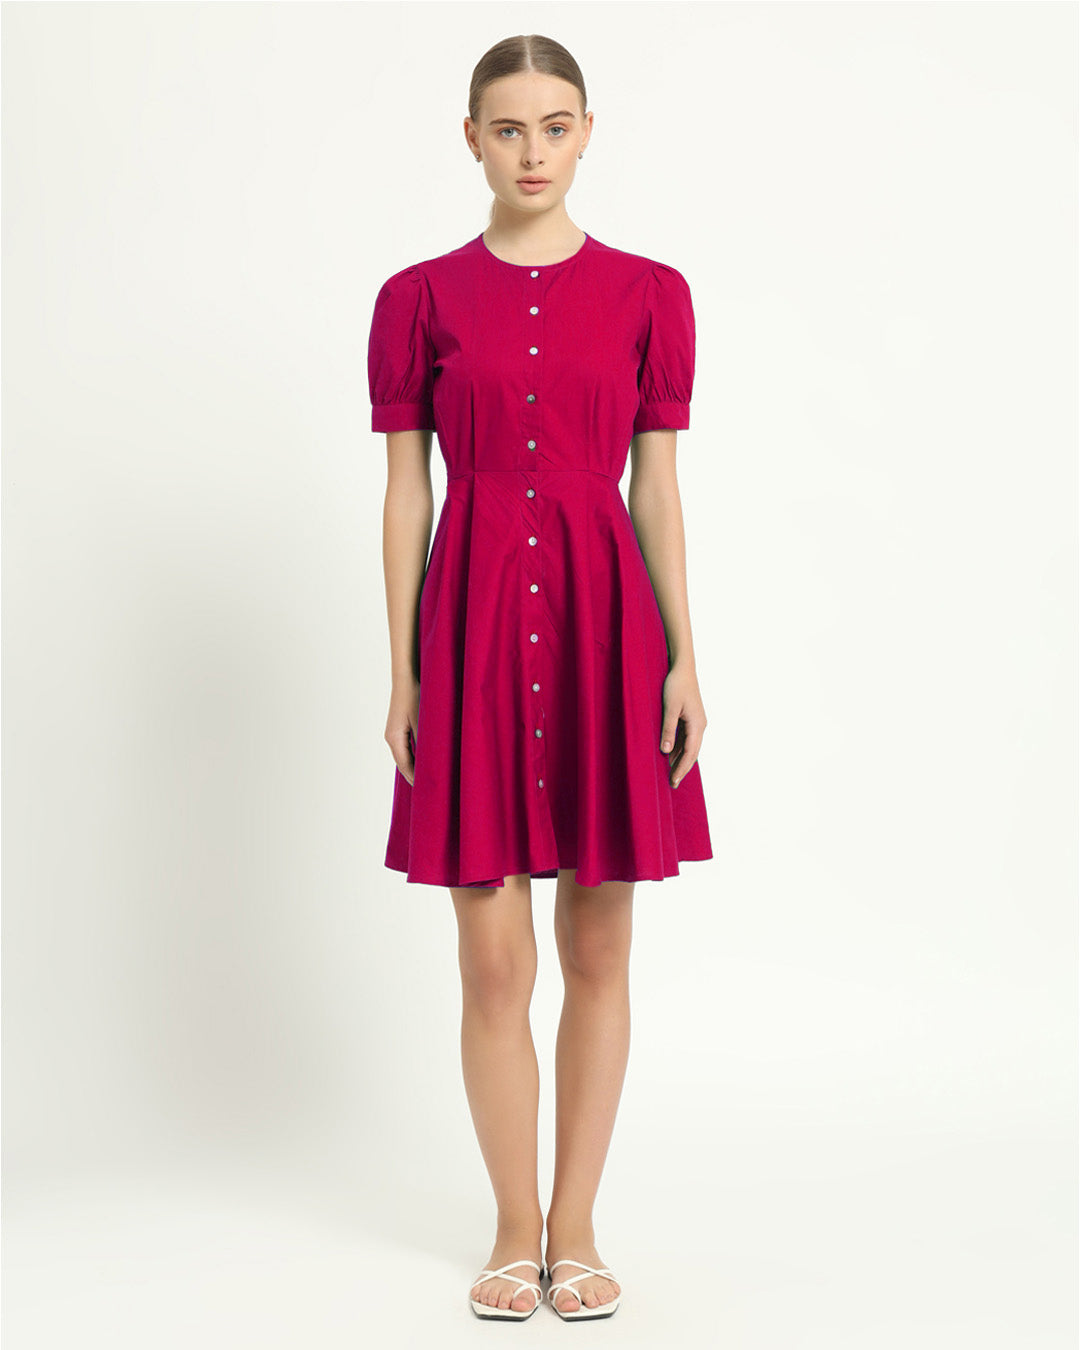 The Kittsee Berry Cotton Dress